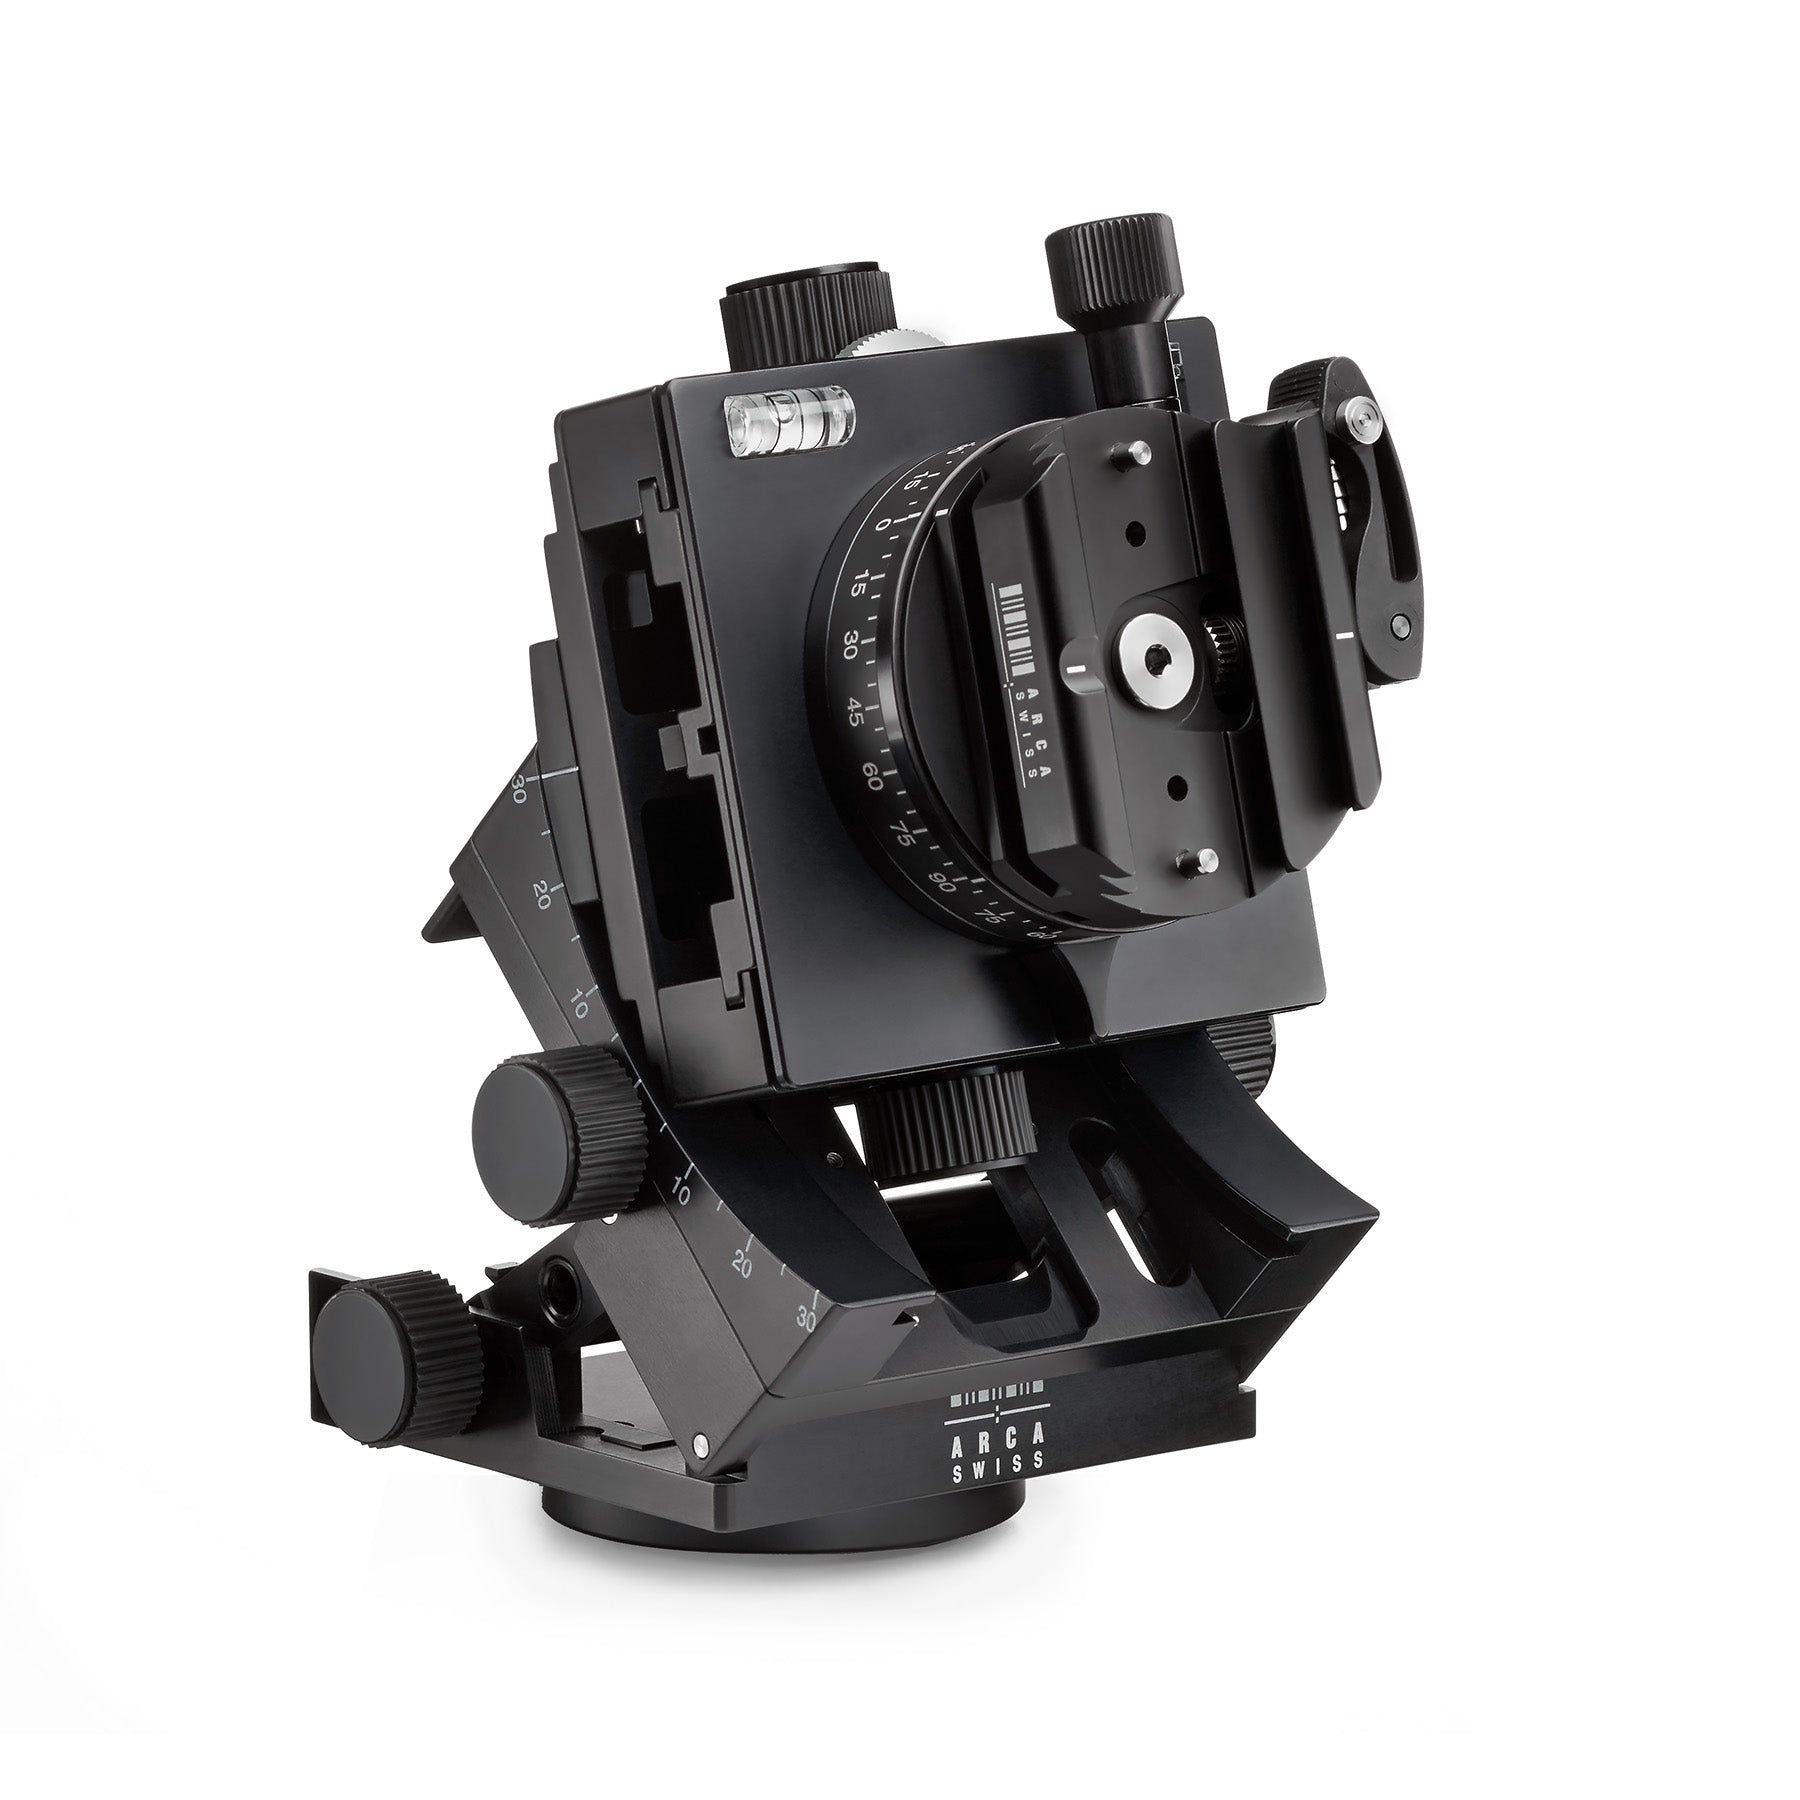 Arca-Swiss C1 Cube gp tripod head with flipLock quick release, 3/4 front view photograph with the head open and with 30 degrees of tilt, for the geared panning model 8501300.1